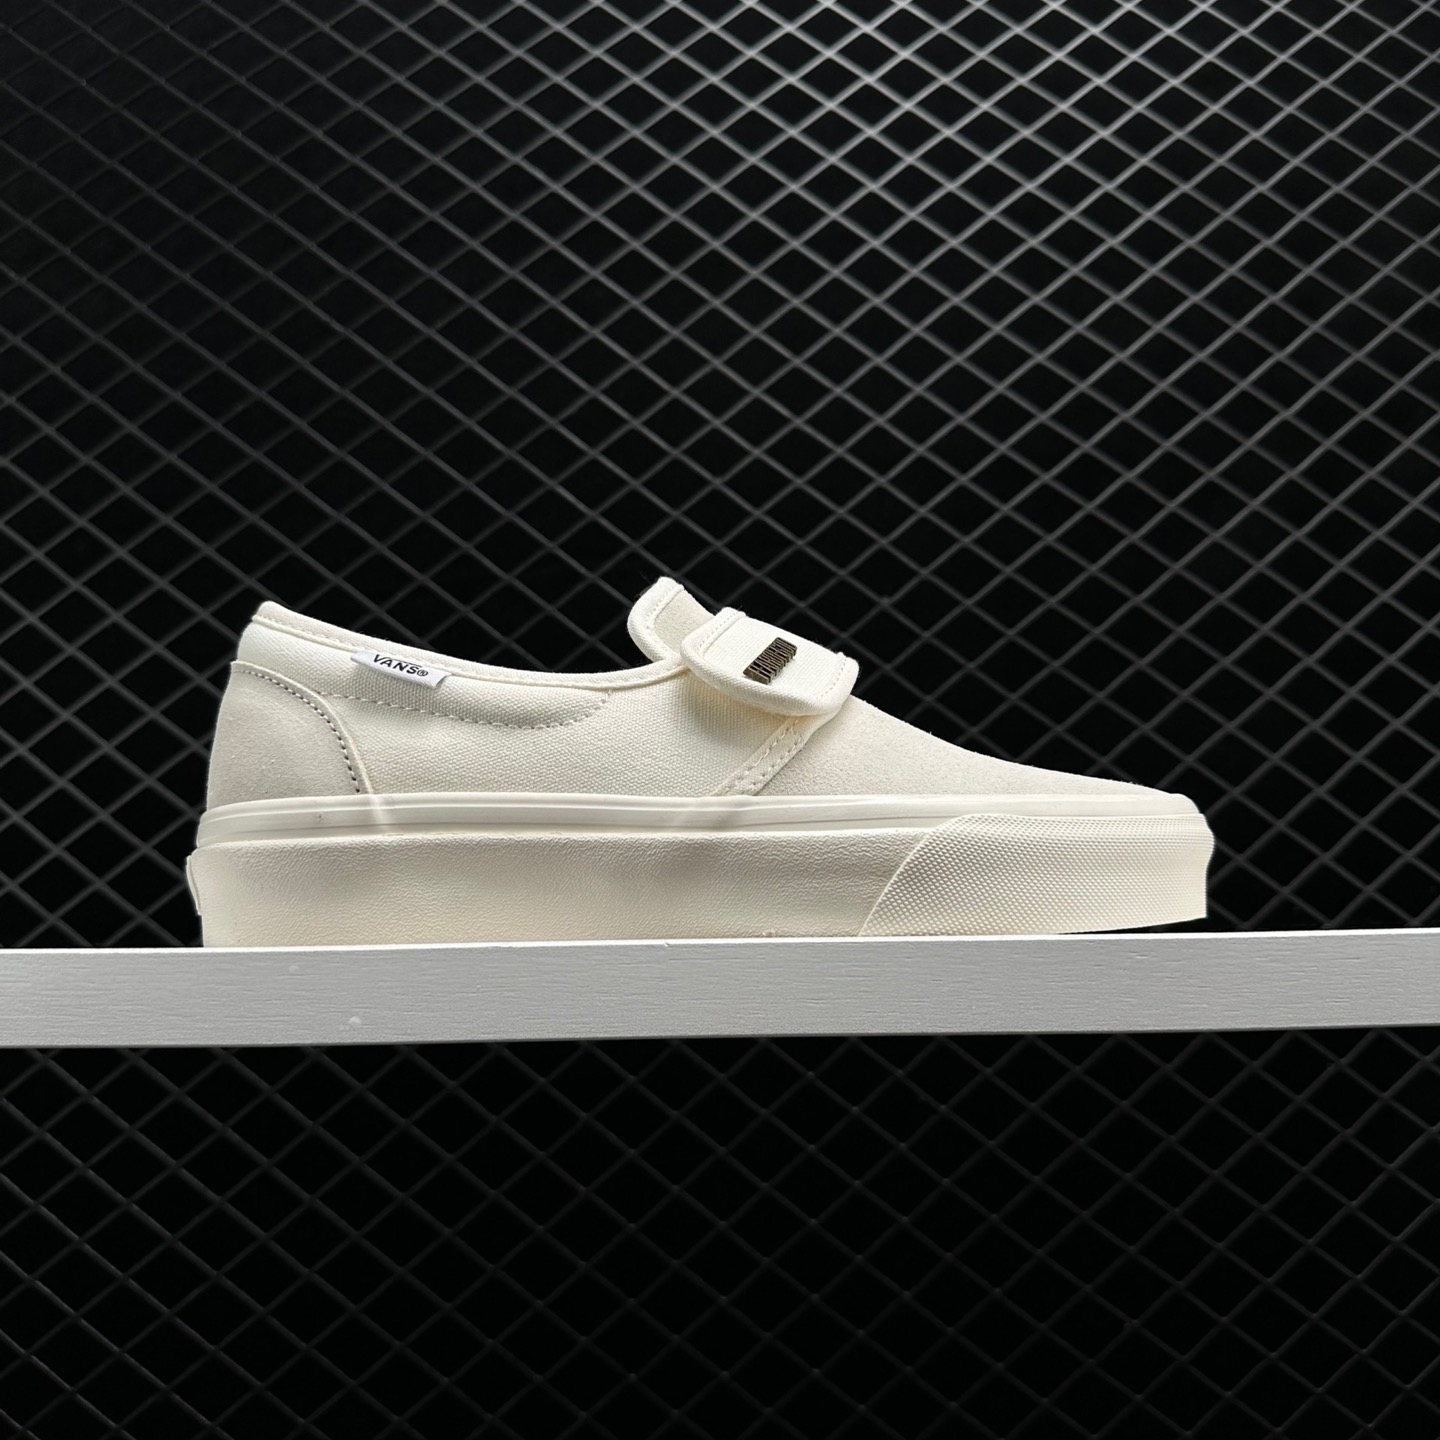 Vans Fear Of God X Slip-On 47 DX White - Limited Edition Sneakers